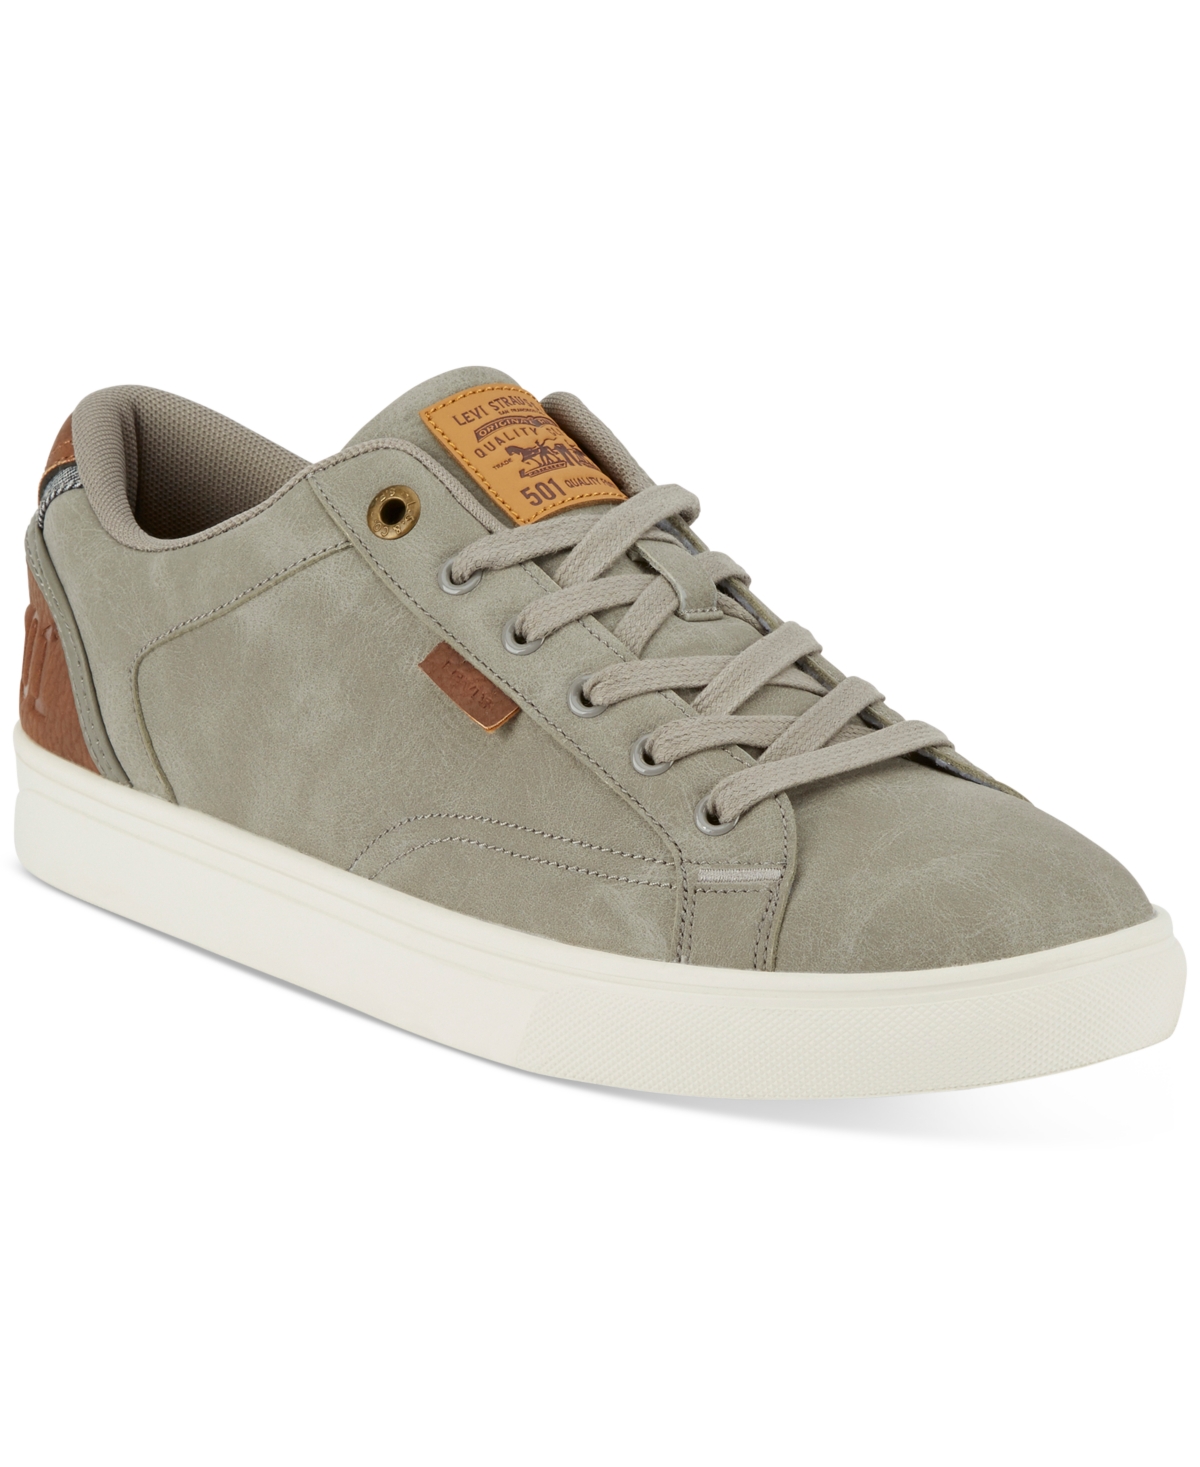 UPC 191605775421 product image for Levi's Men's Jeffrey 501 Waxed Faux-Leather Sneakers Men's Shoes | upcitemdb.com